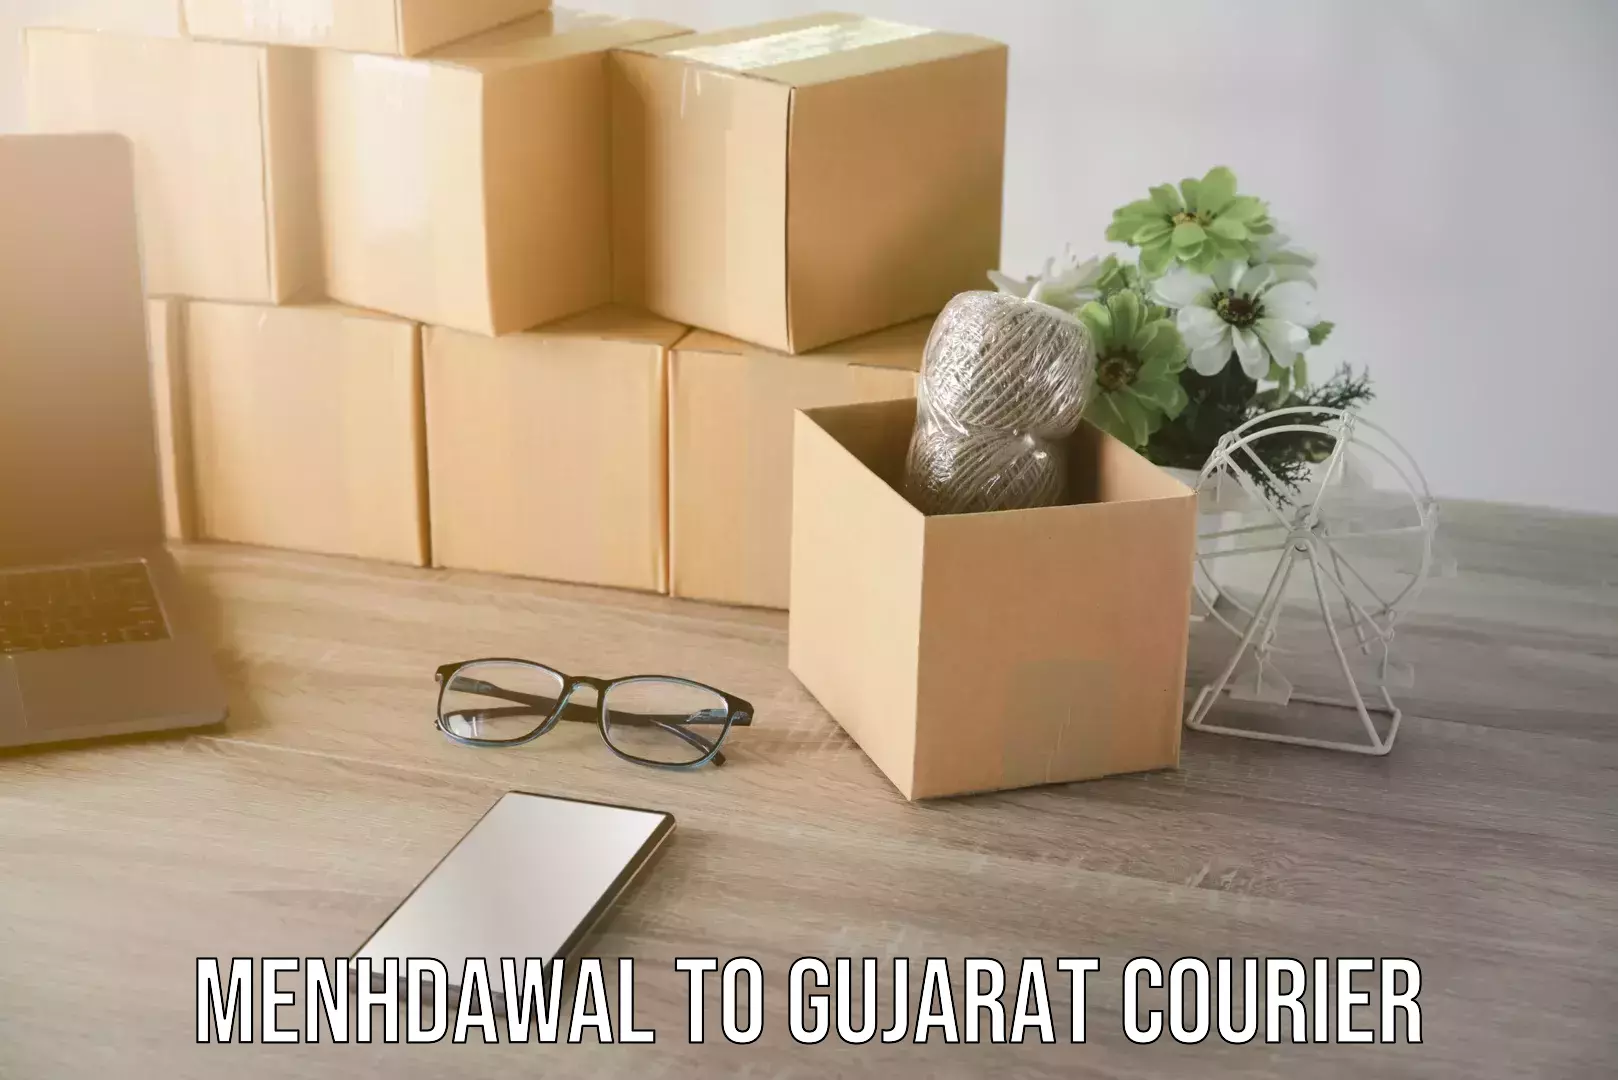 Trusted relocation experts Menhdawal to Gujarat